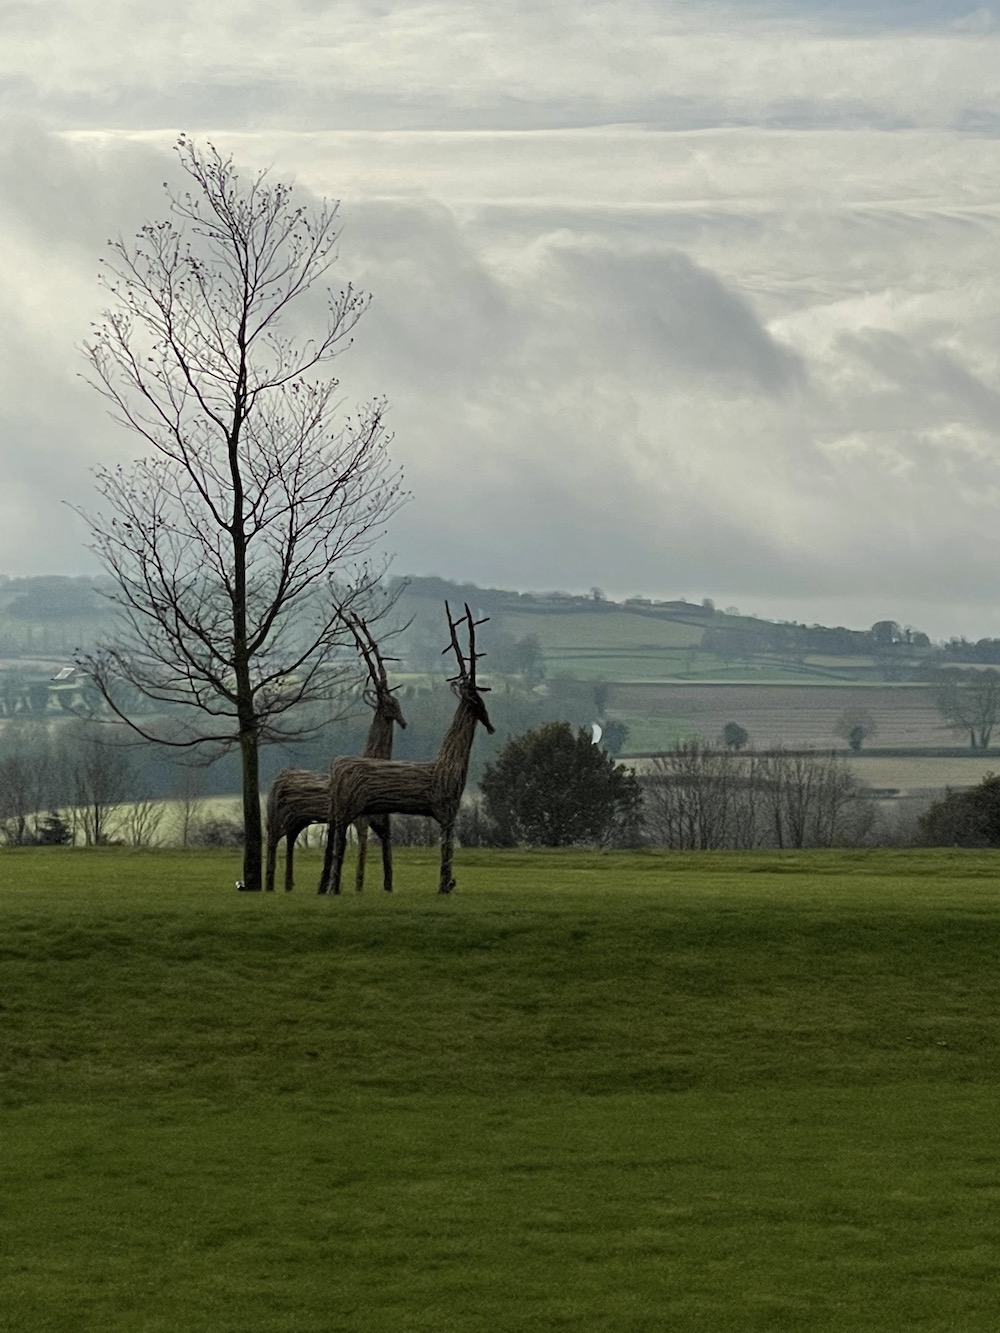 View of sibford gower with wooden life size reindeer